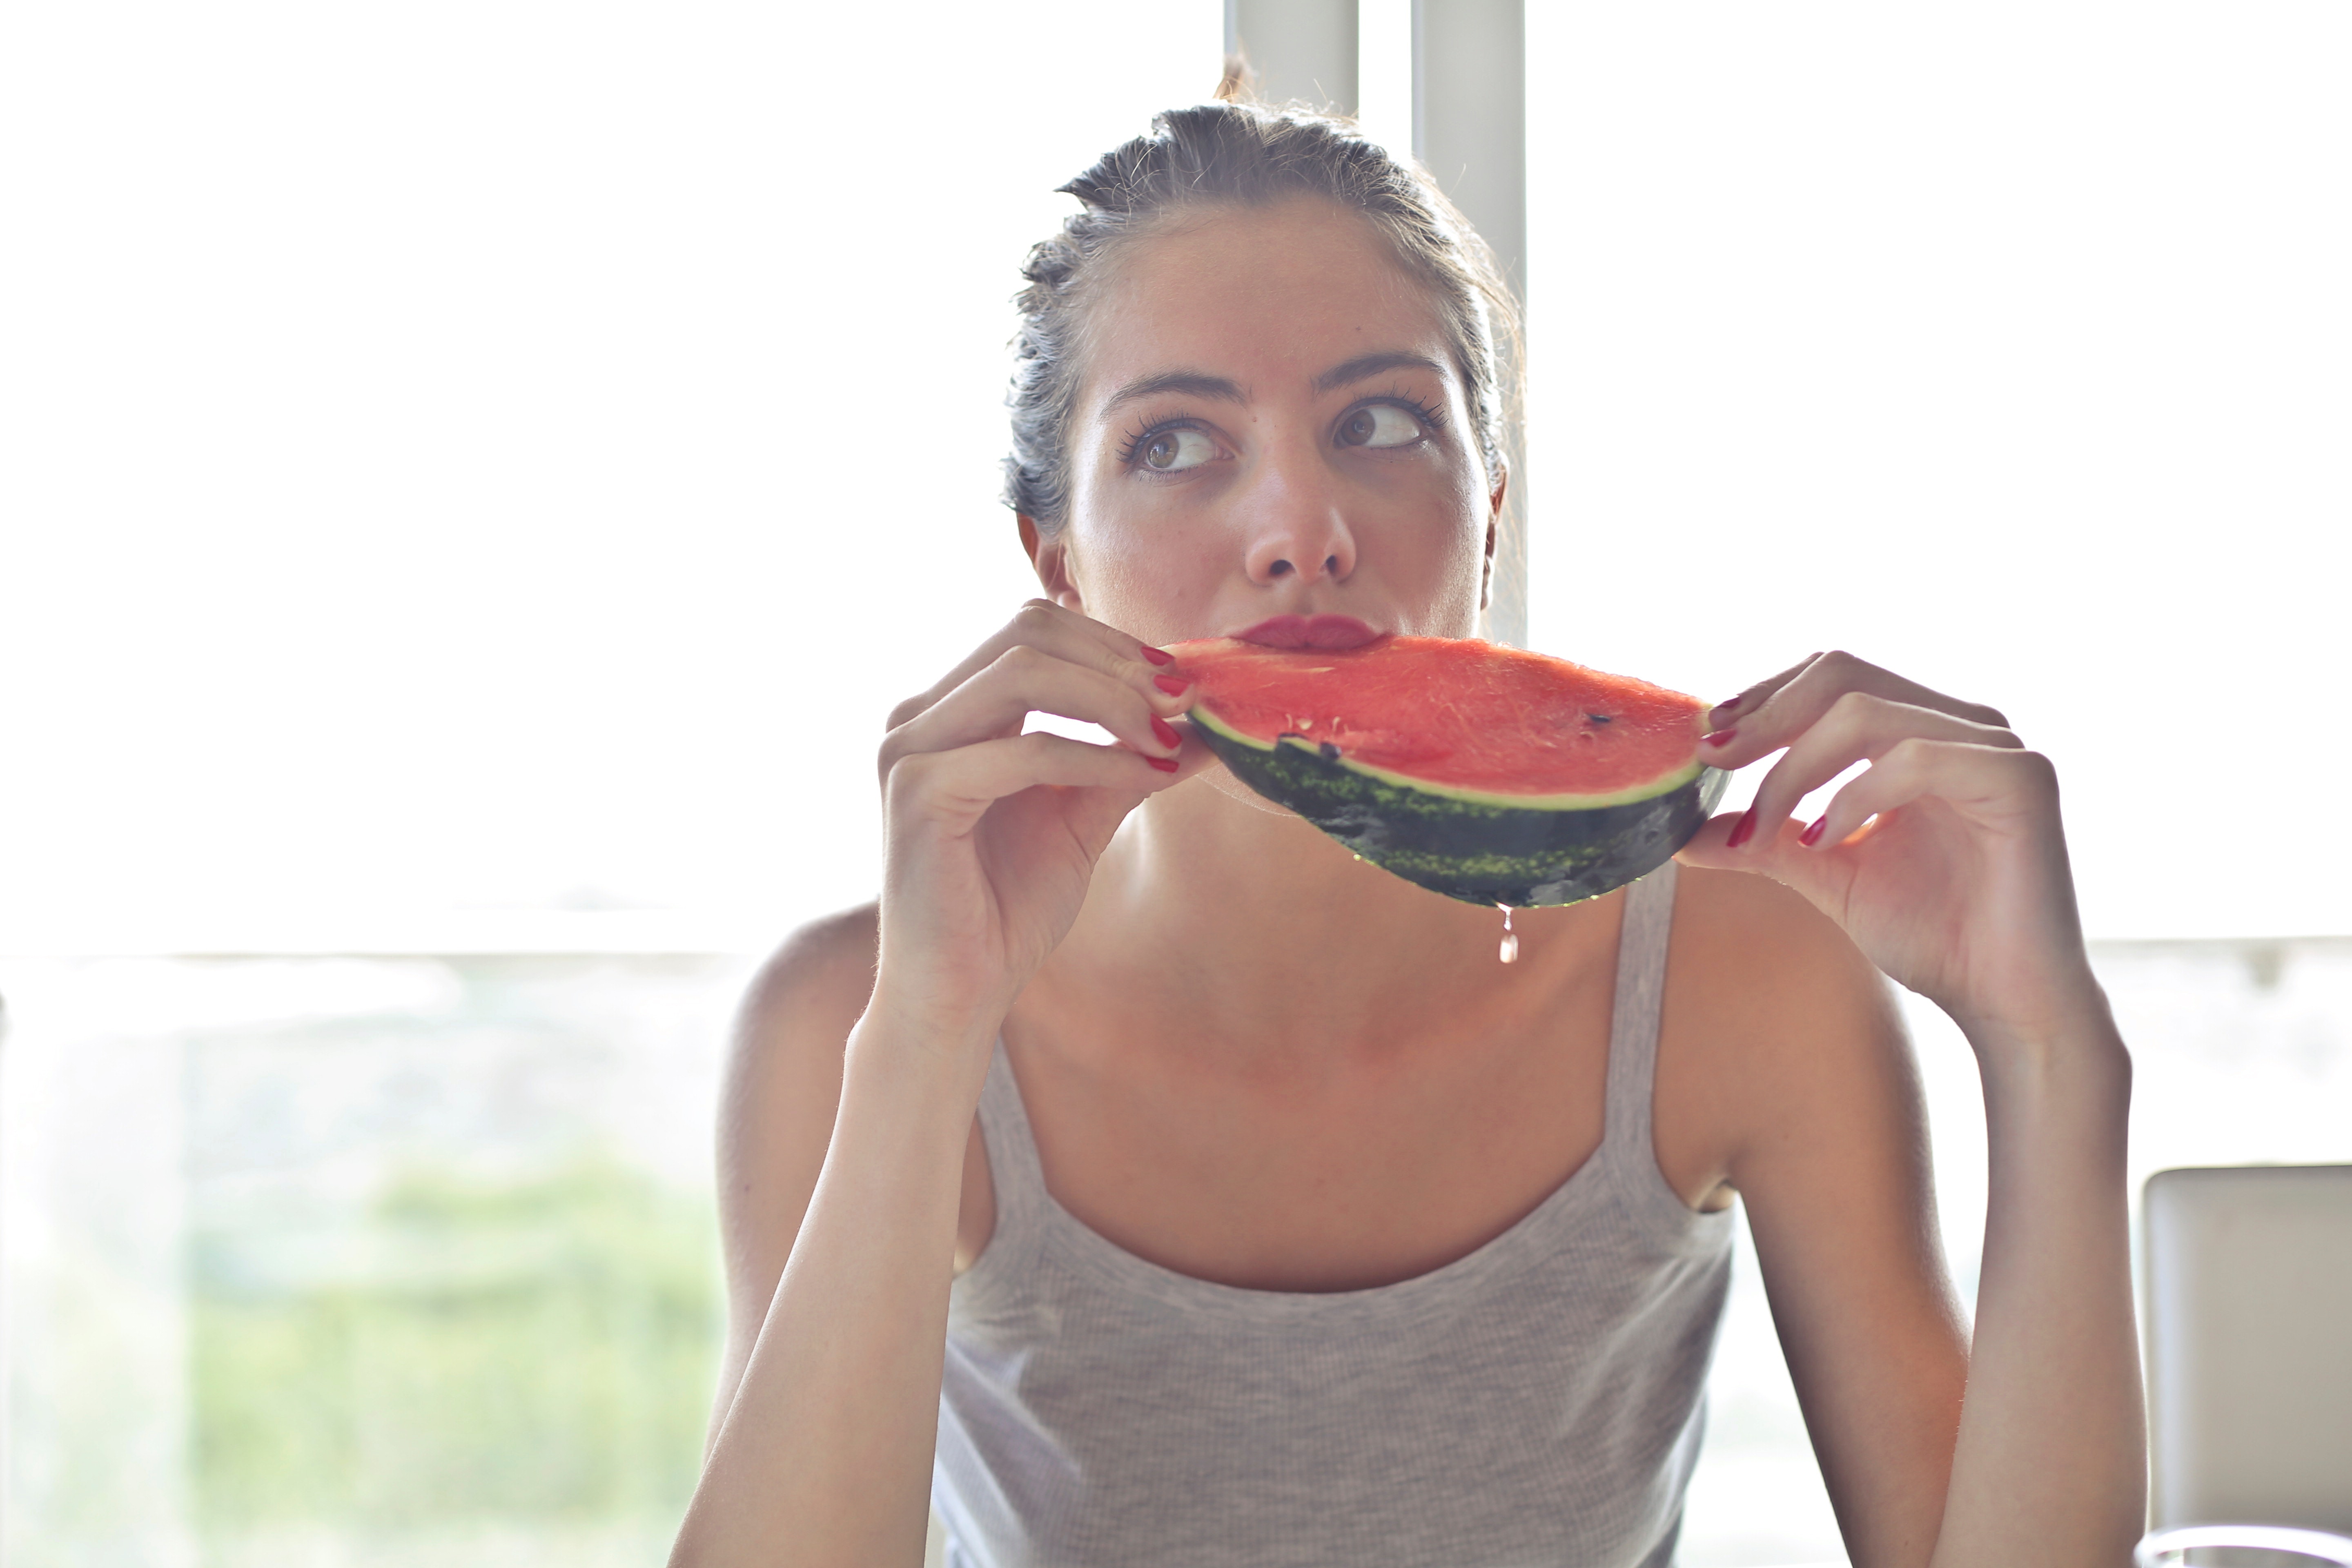 Woman in gray tank top holding watermelon photo